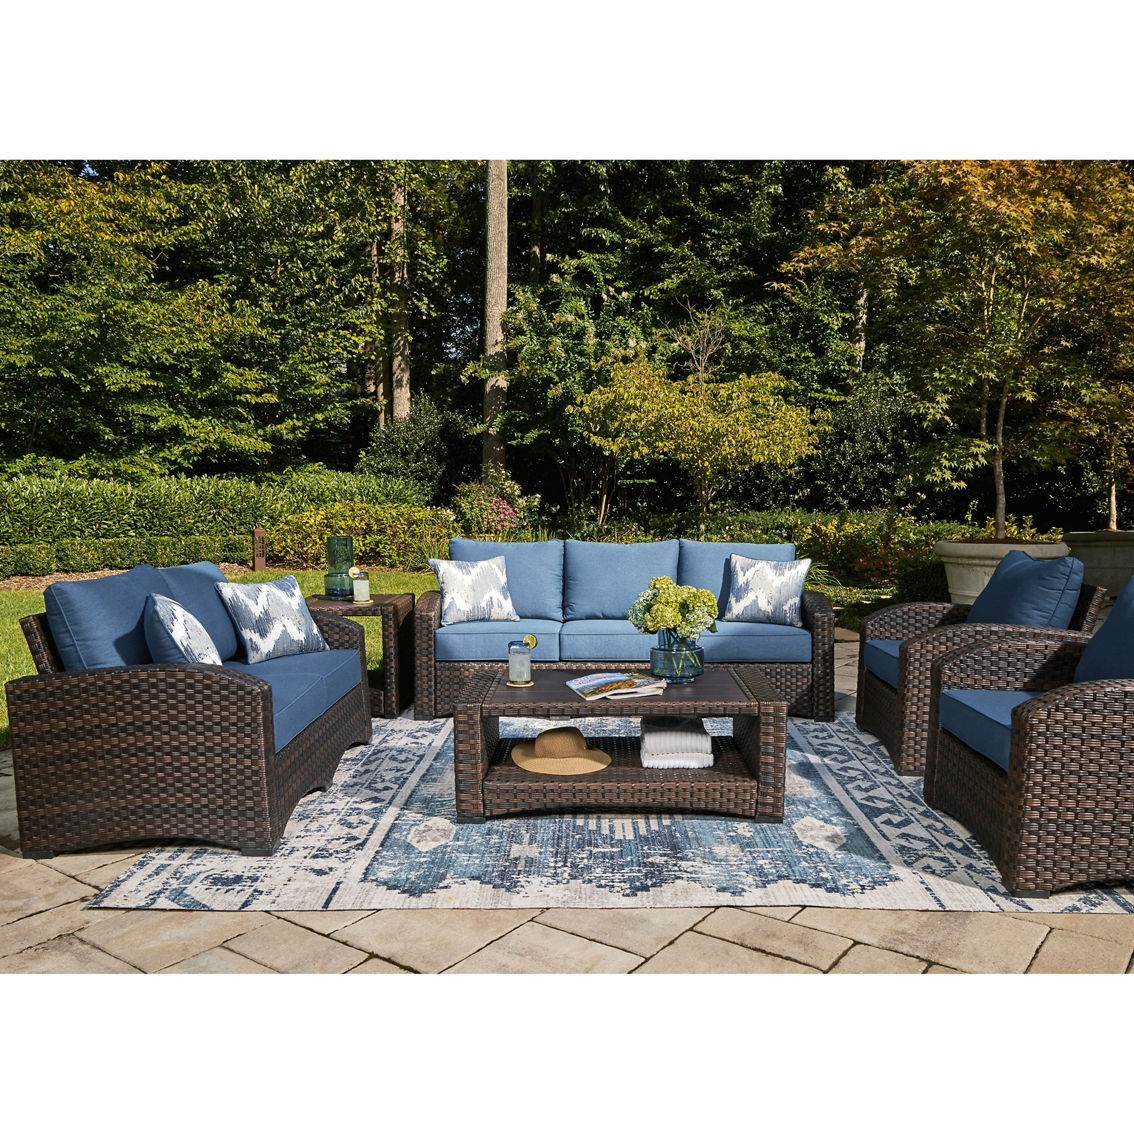 Signature Design by Ashley Windglow Outdoor Sofa with Cushion - Image 2 of 2